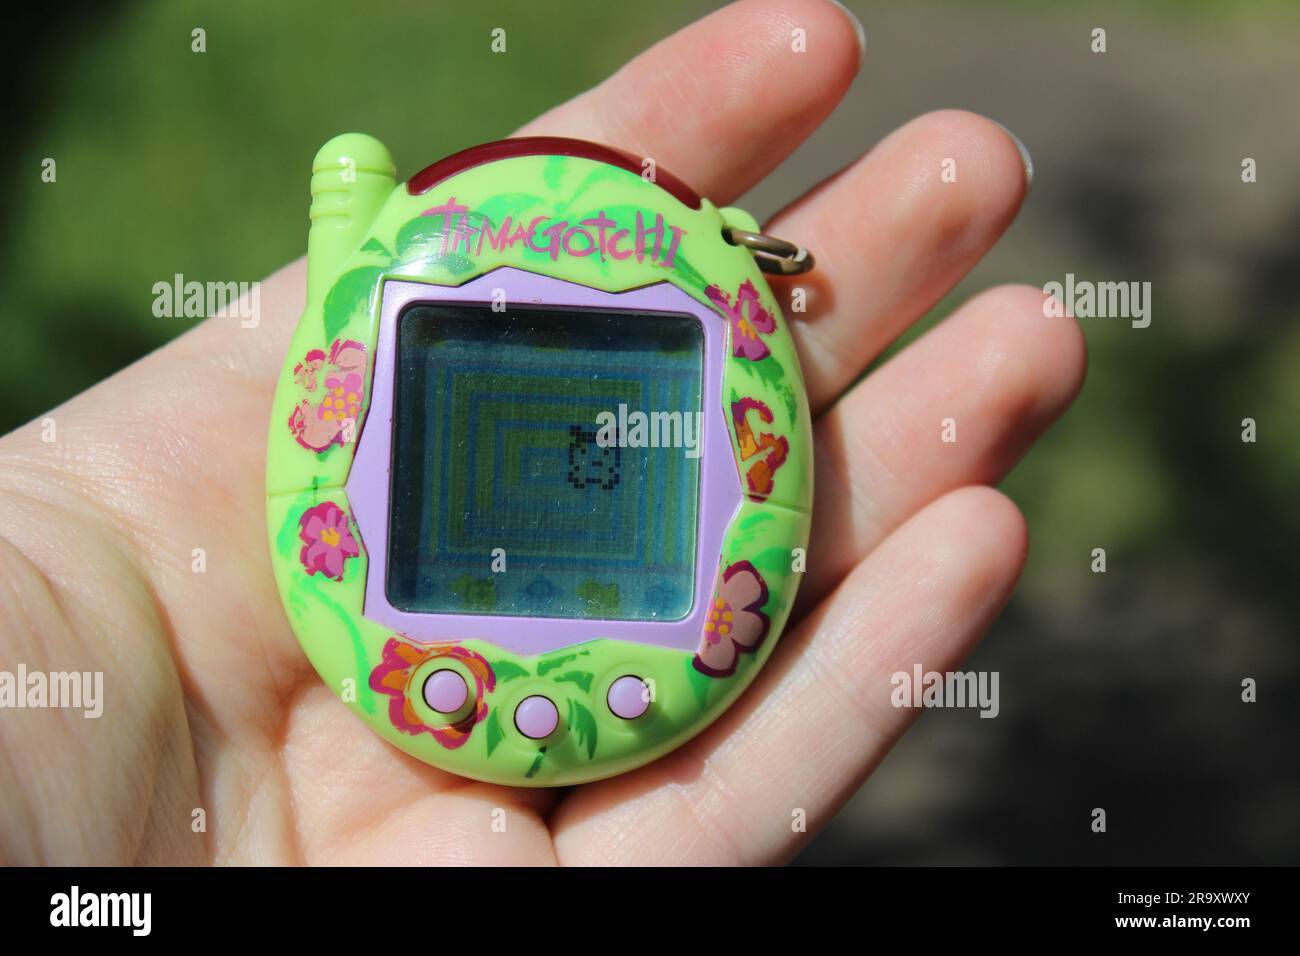 Photo depicting a tamagotchi device, green with tropical flowers, held in someone's hand. Stock Photo